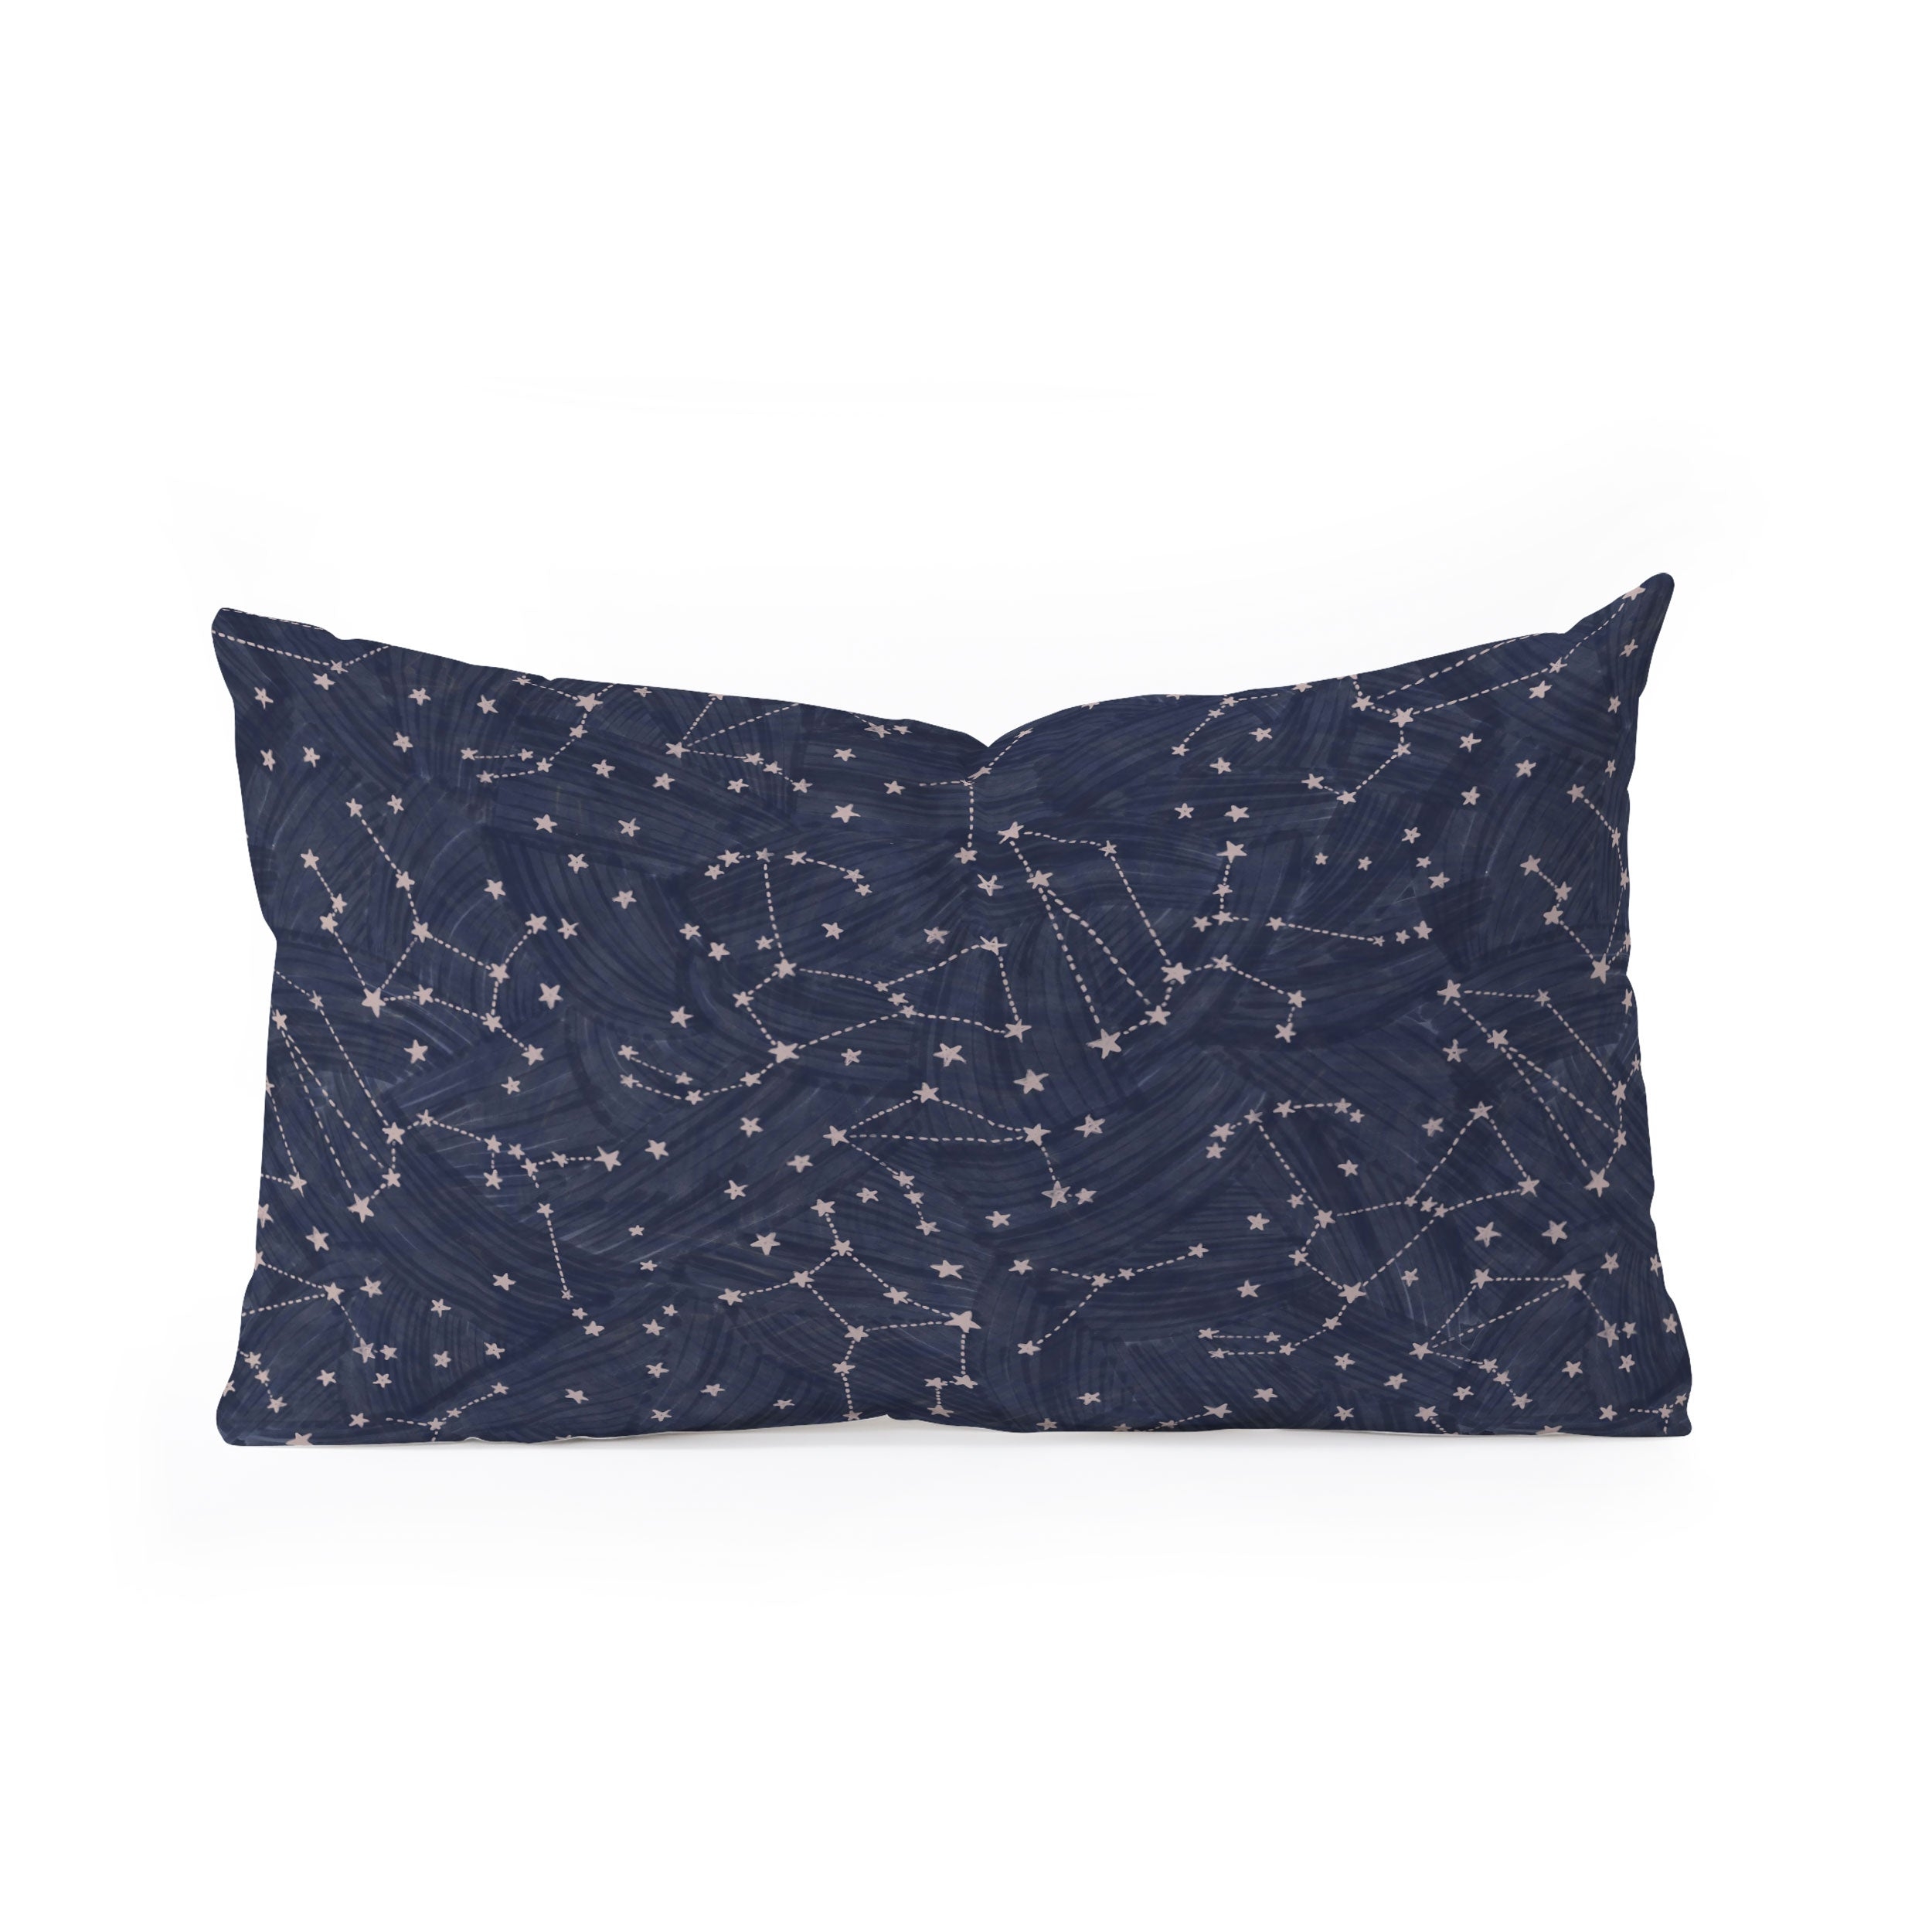 NIGHTS SKY IN NAVY  BY DASH AND ASH - Image 0